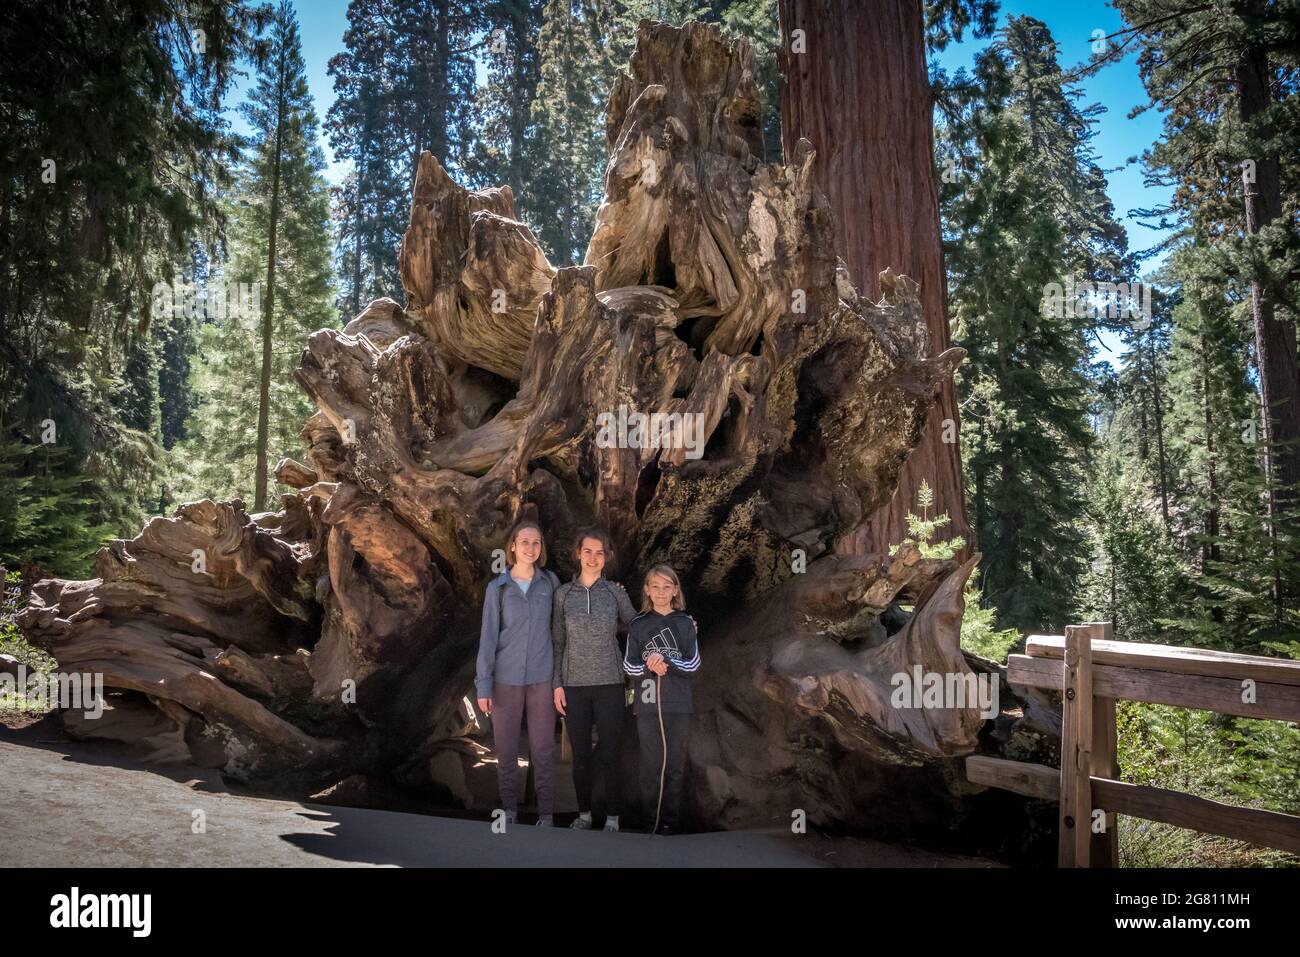 Three children stand at the opening to the 'Fallen Monarch,' a hollowed out tunnel tree visitors can walk through in Grant Grove loop trail in Kings C Stock Photo